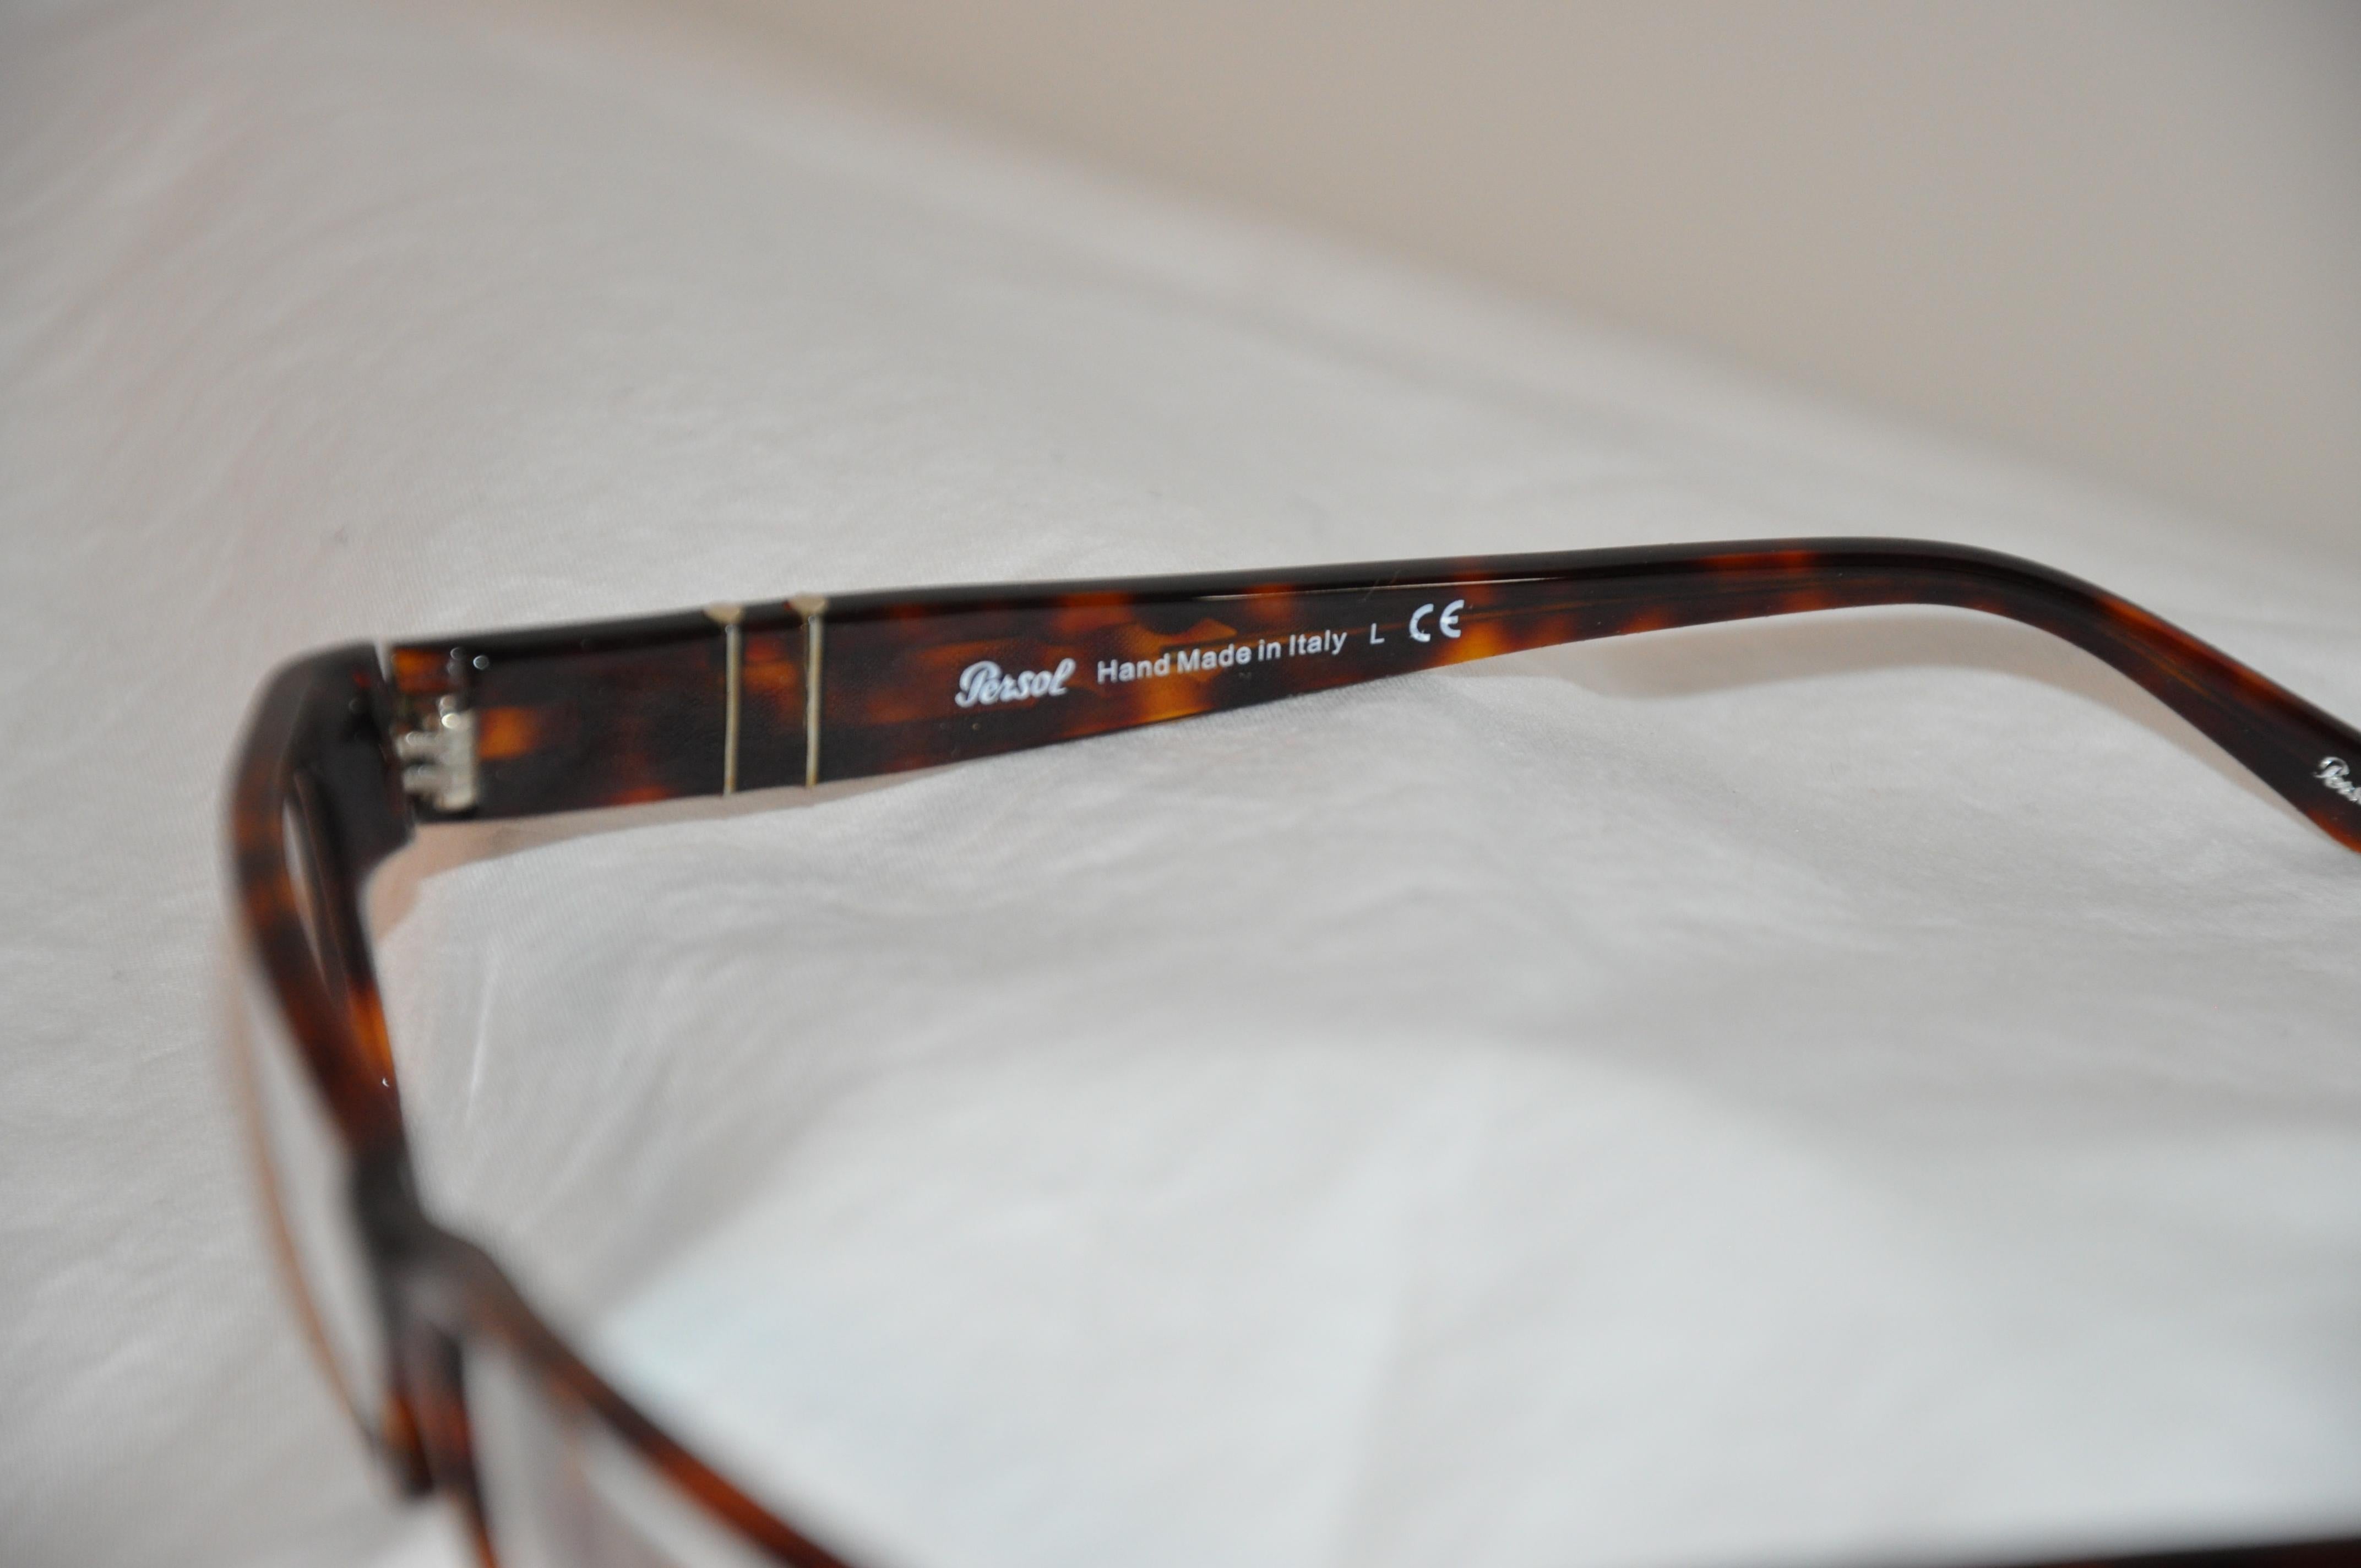 Persol's wonderfully detailed thick tortoise shell lucid glasses are superbly accented with silver hardware along both corners as well as along both arms. Hand-made in Italy, the front measures 5 1/4 inches across the front, the height is 1 1/4